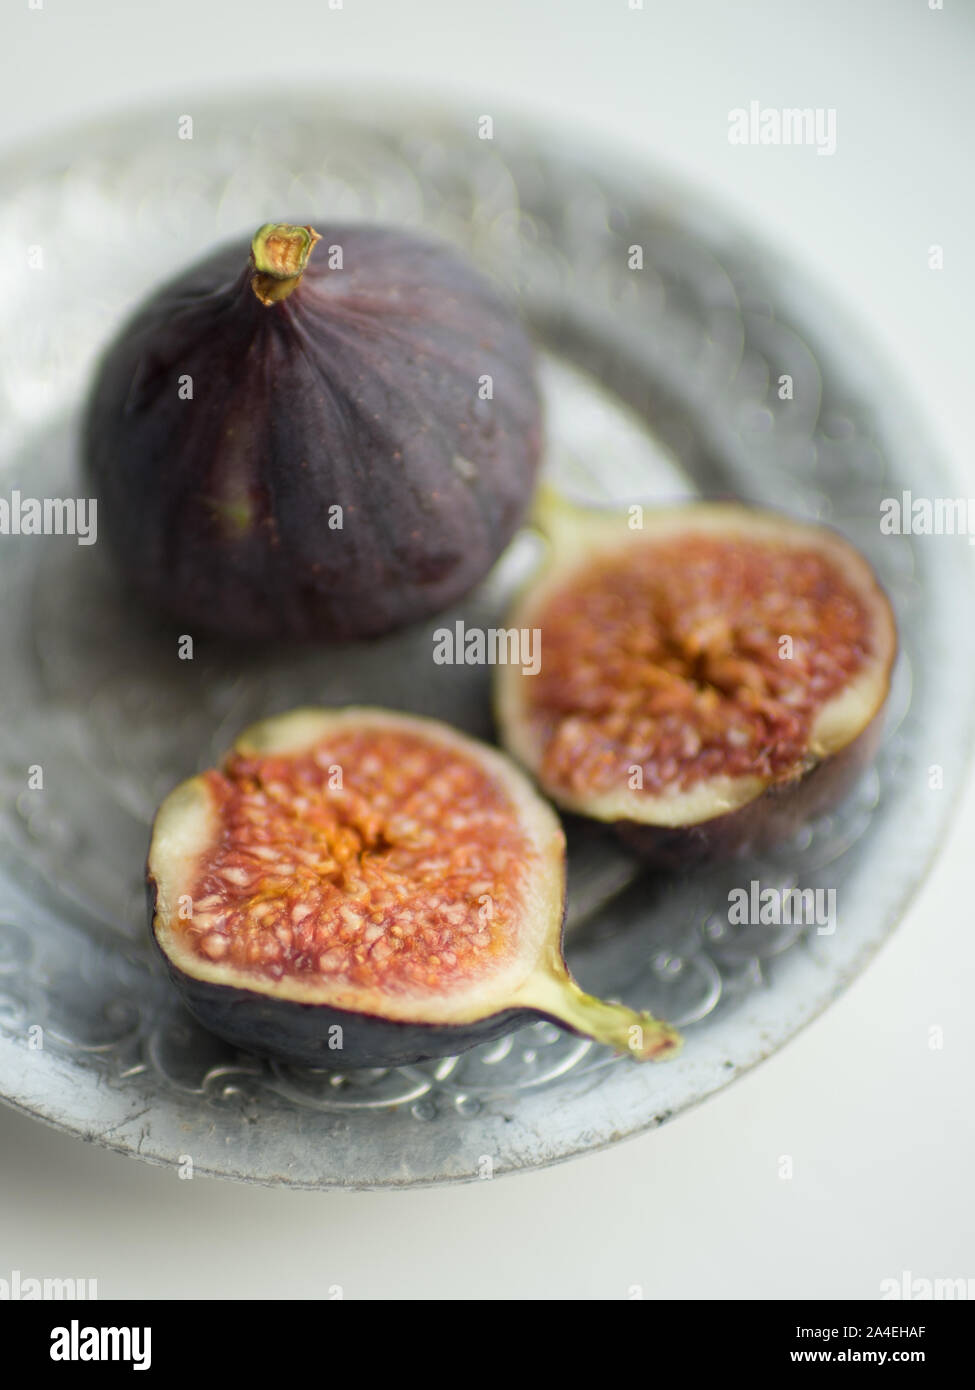 Two ripe figs. One whole fig and the second cut in half on a white table. Stock Photo